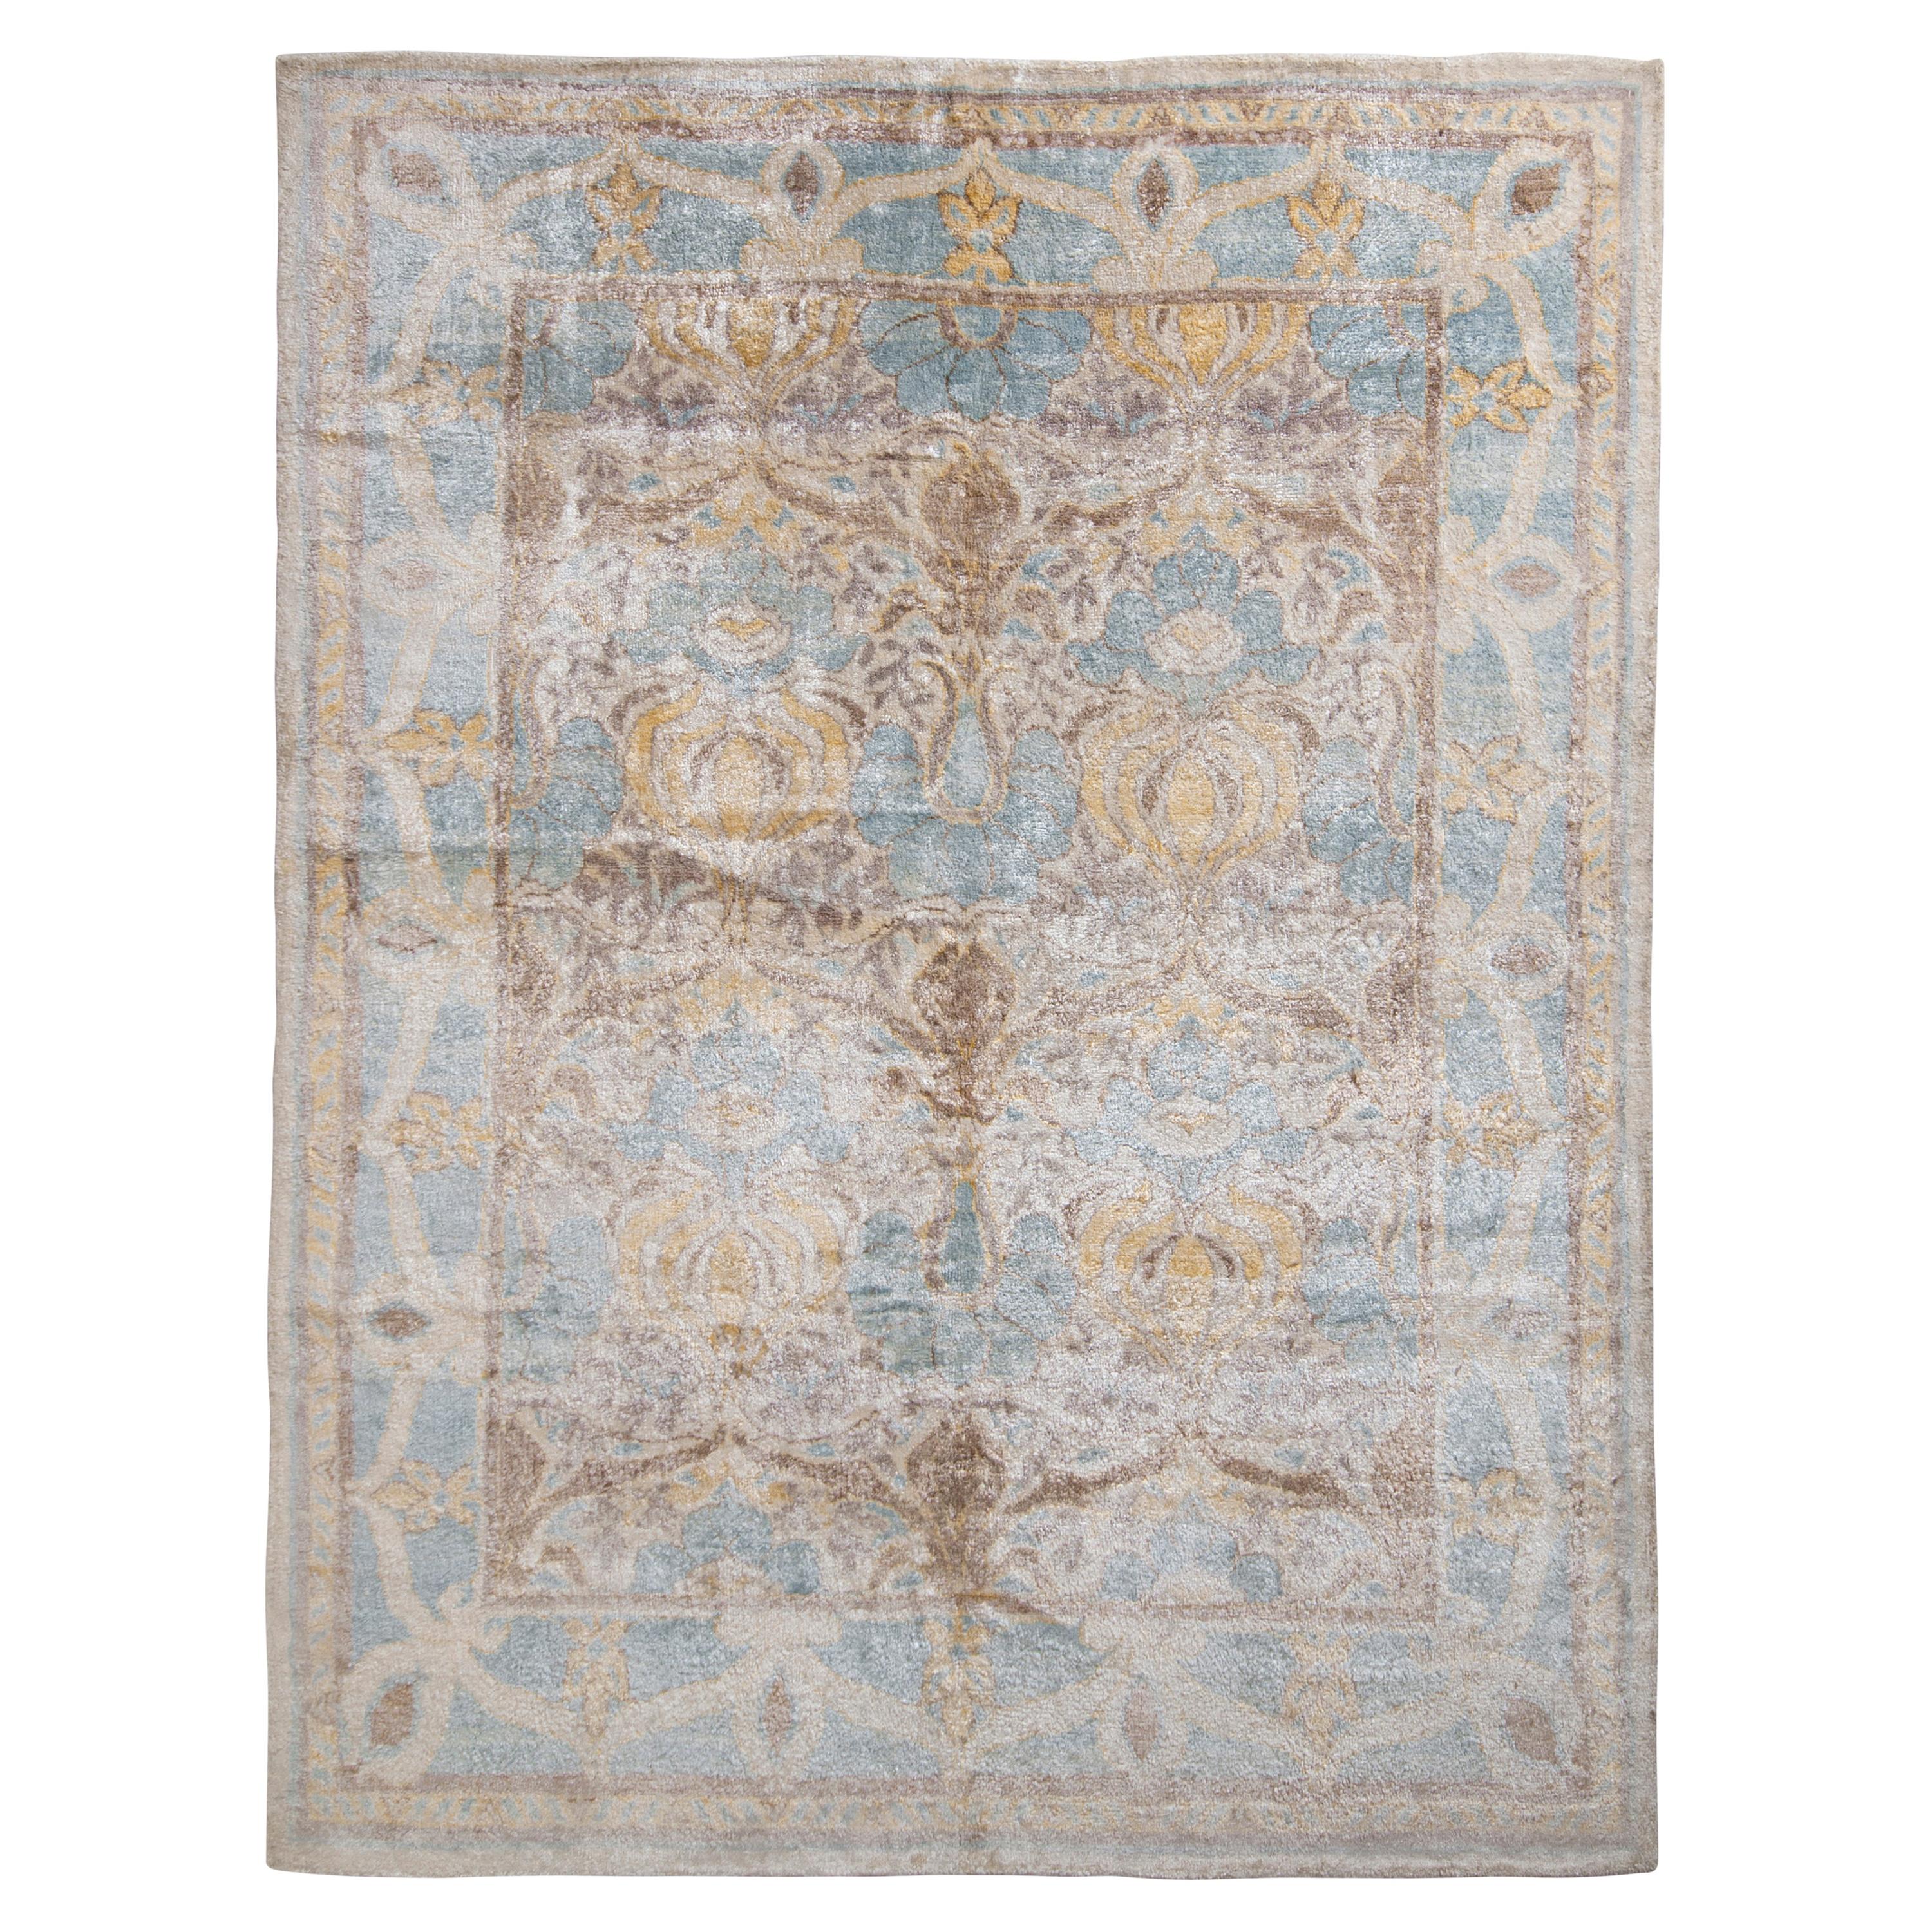 Rug & Kilim’s Oushak Style Rug in Blue and Beige-Brown Floral Pattern For Sale